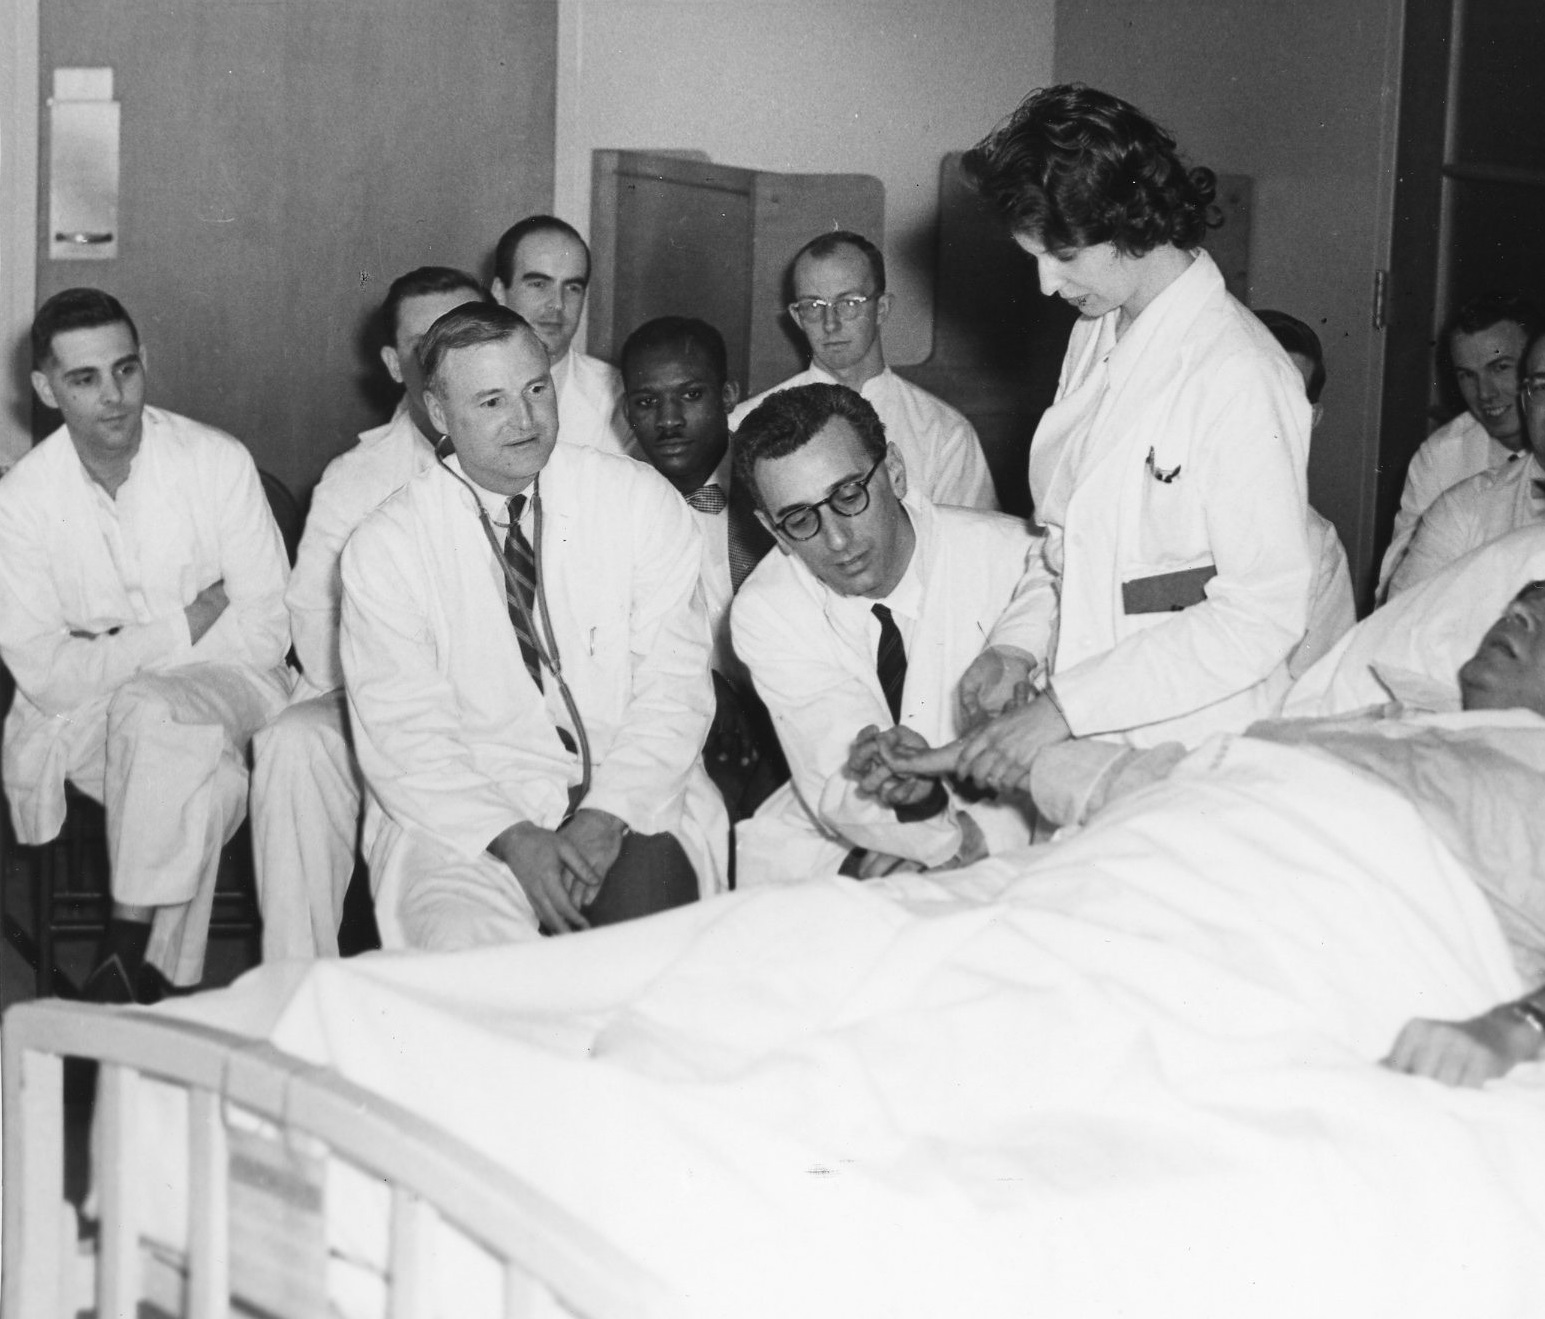 Cameron seated in centre surrounded by medical residents, patient demonstration